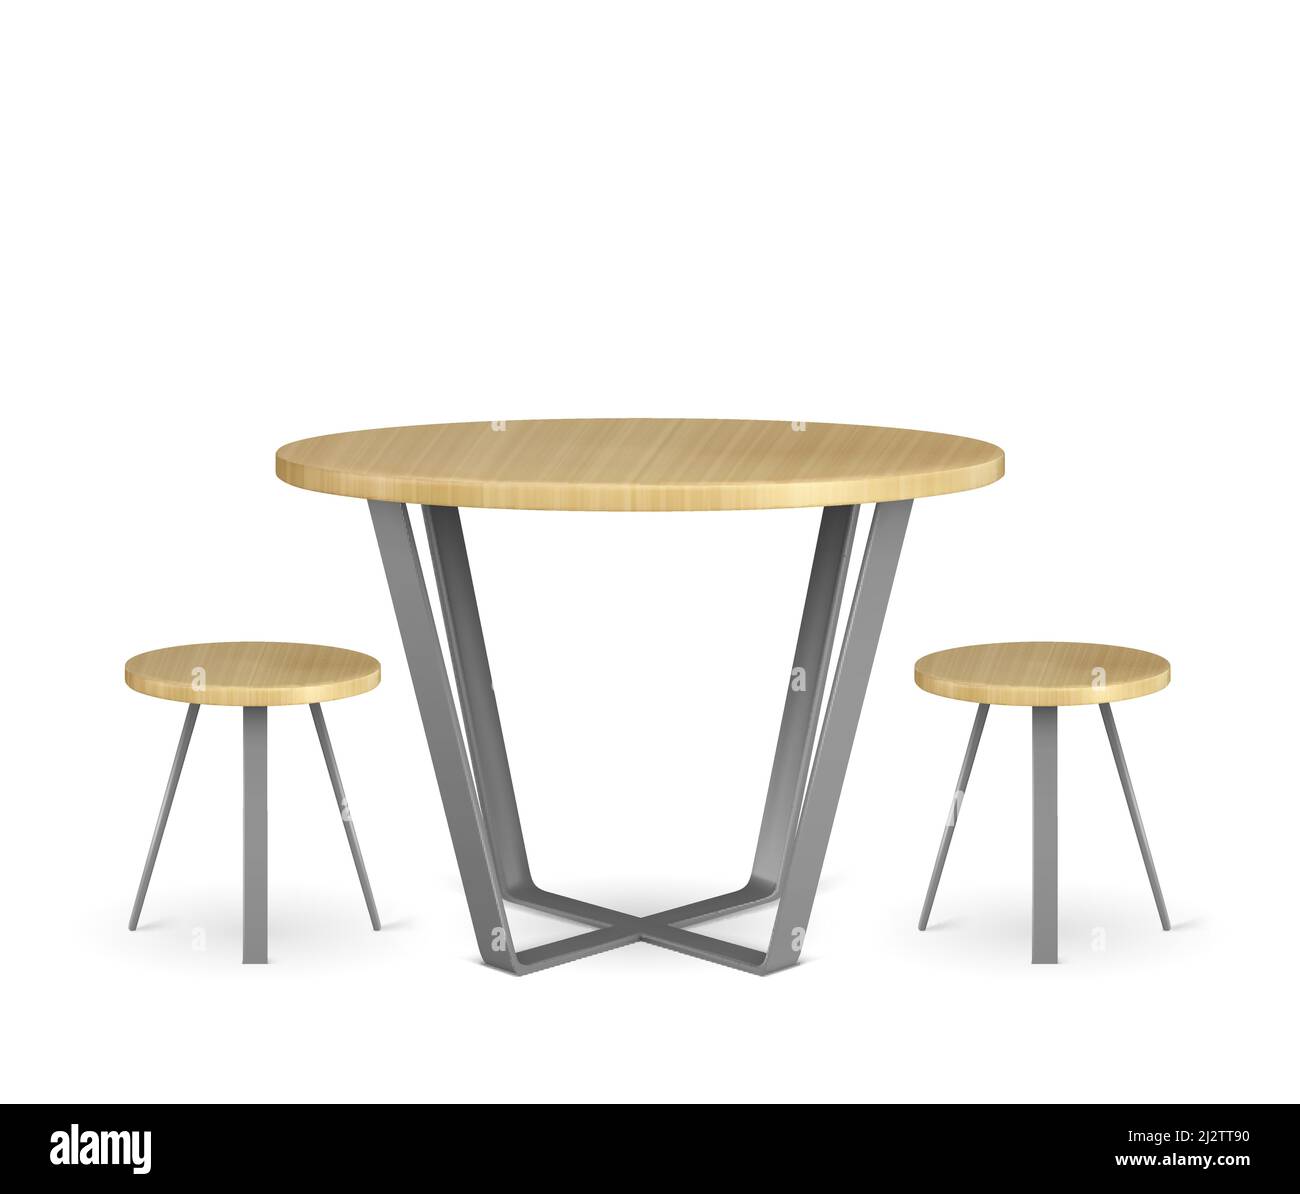 Round wooden table and circle chairs isolated on white background. Empty dining desk and pews with metal legs. restaurant, home, cafeteria furniture, Stock Vector